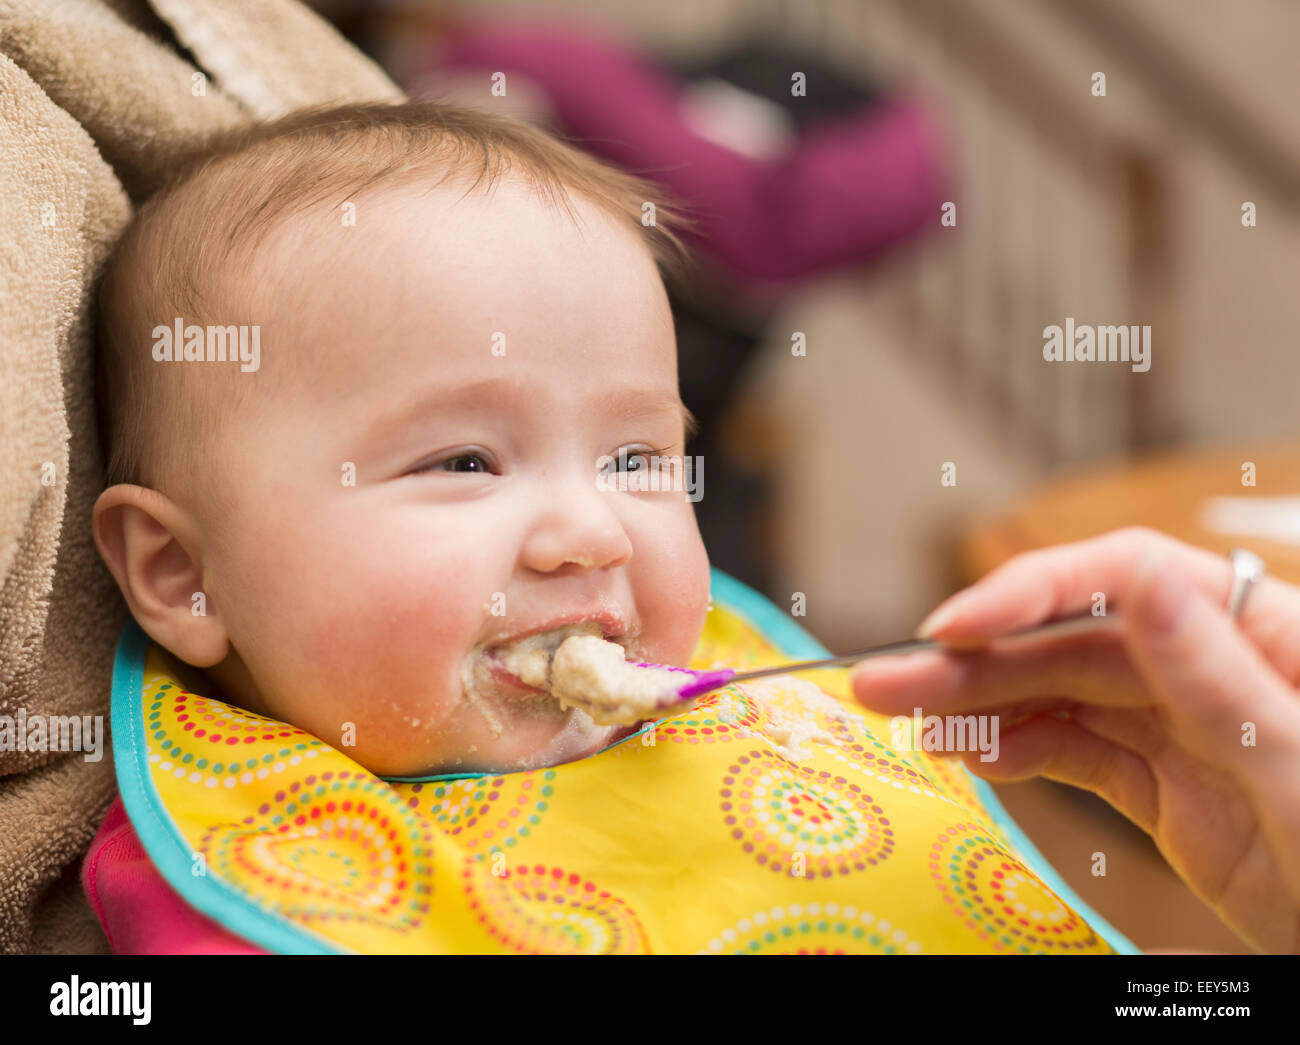 Small baby girl is given her first solid food on a spoon and is unsure about the process Stock Photo